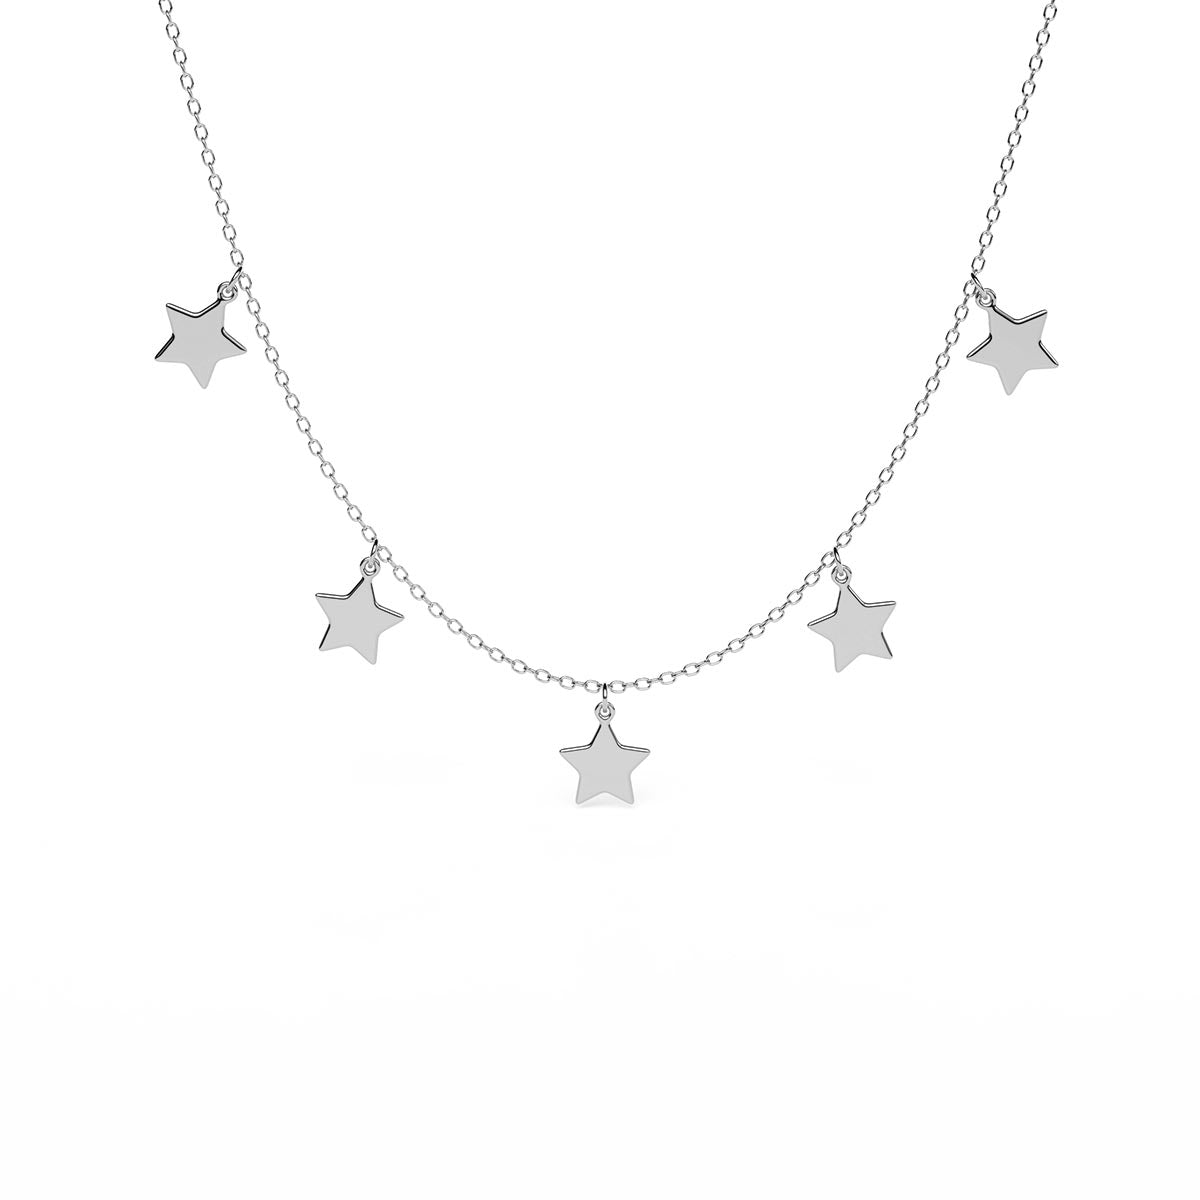 Multiple Dangling Stars Necklace